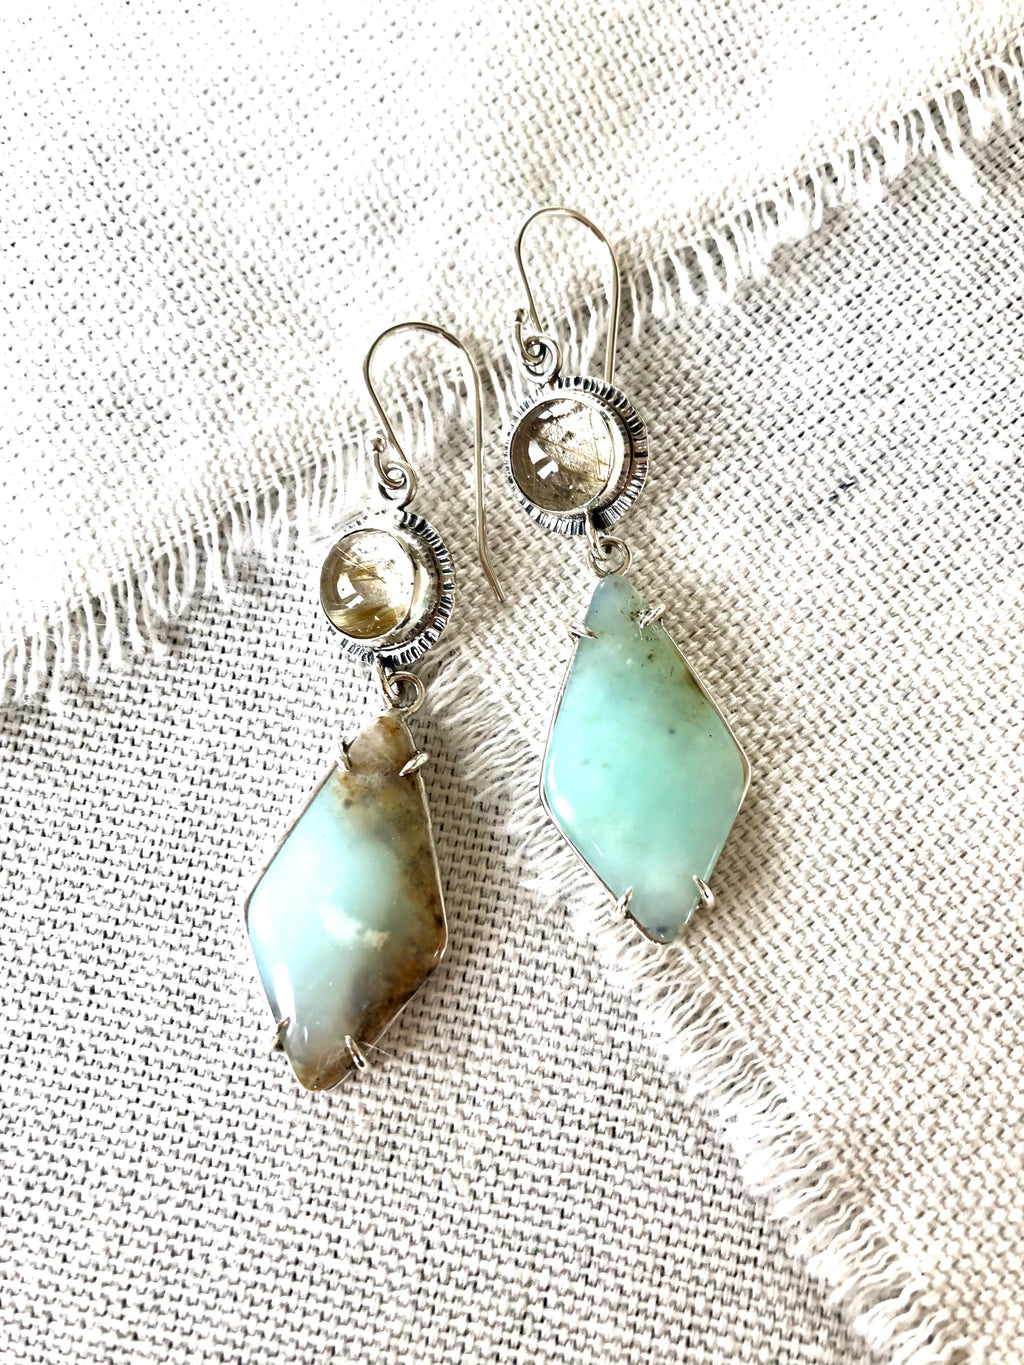 These one of a kind Peruvian blue opal earrings will bring joy and light to any outfit.  These Peruvian Blue Opal earrings are prong set in sterling silver and paired with rutilated quartz stones to continue the soft muted style. 